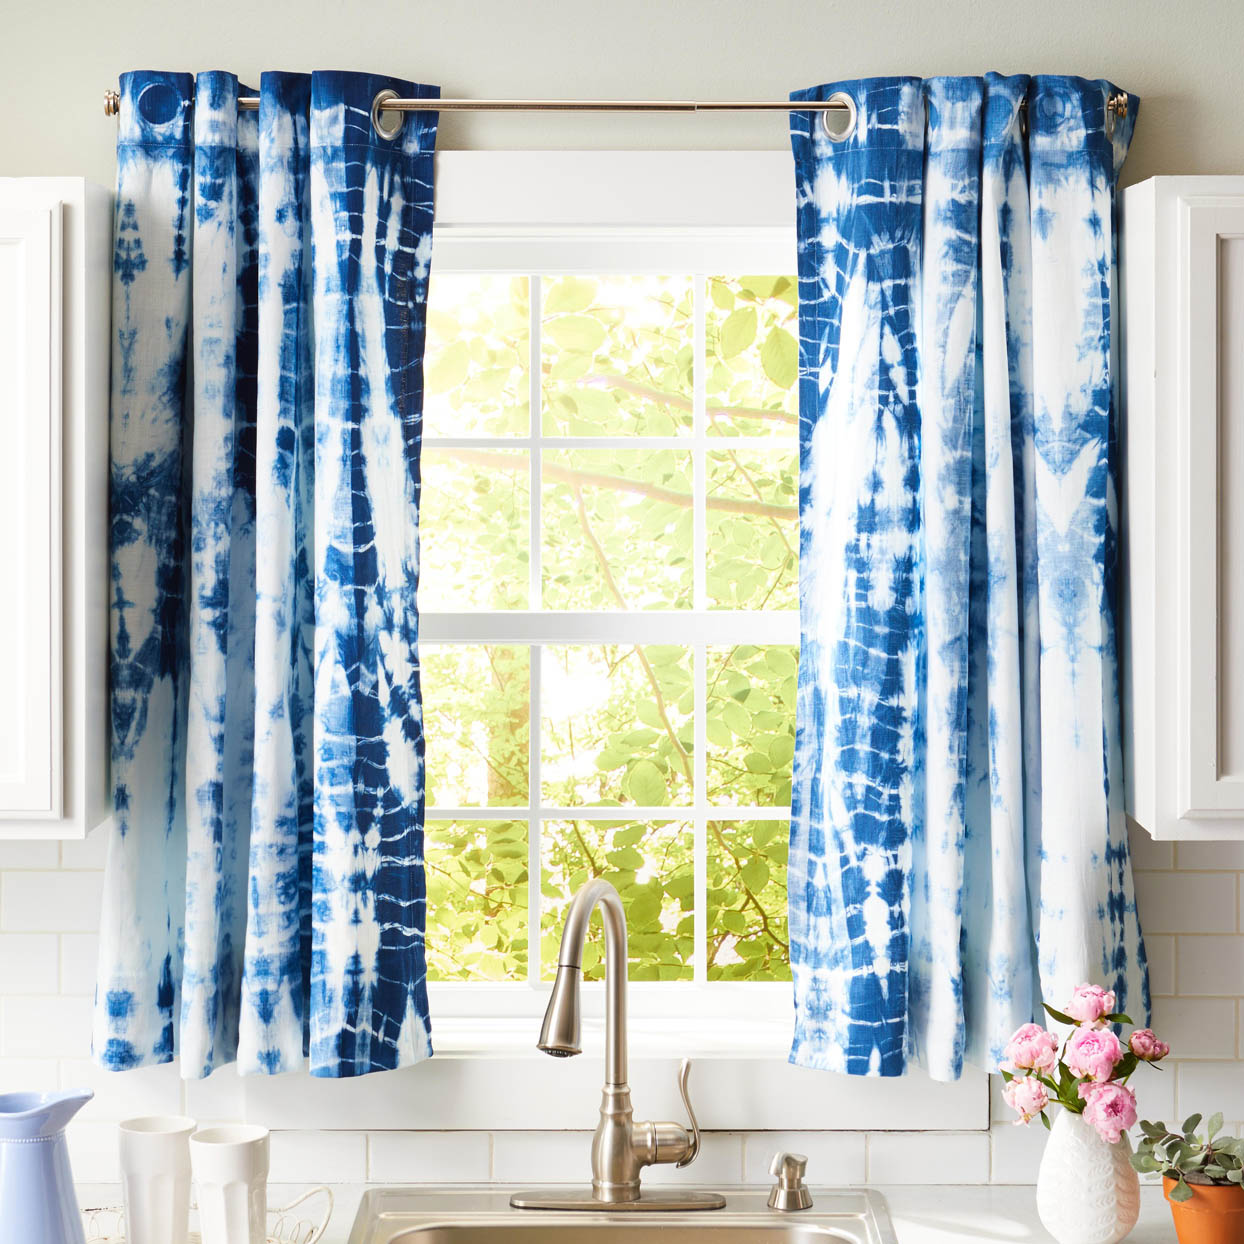 Above Sink Curtain Ideas For Kitchen